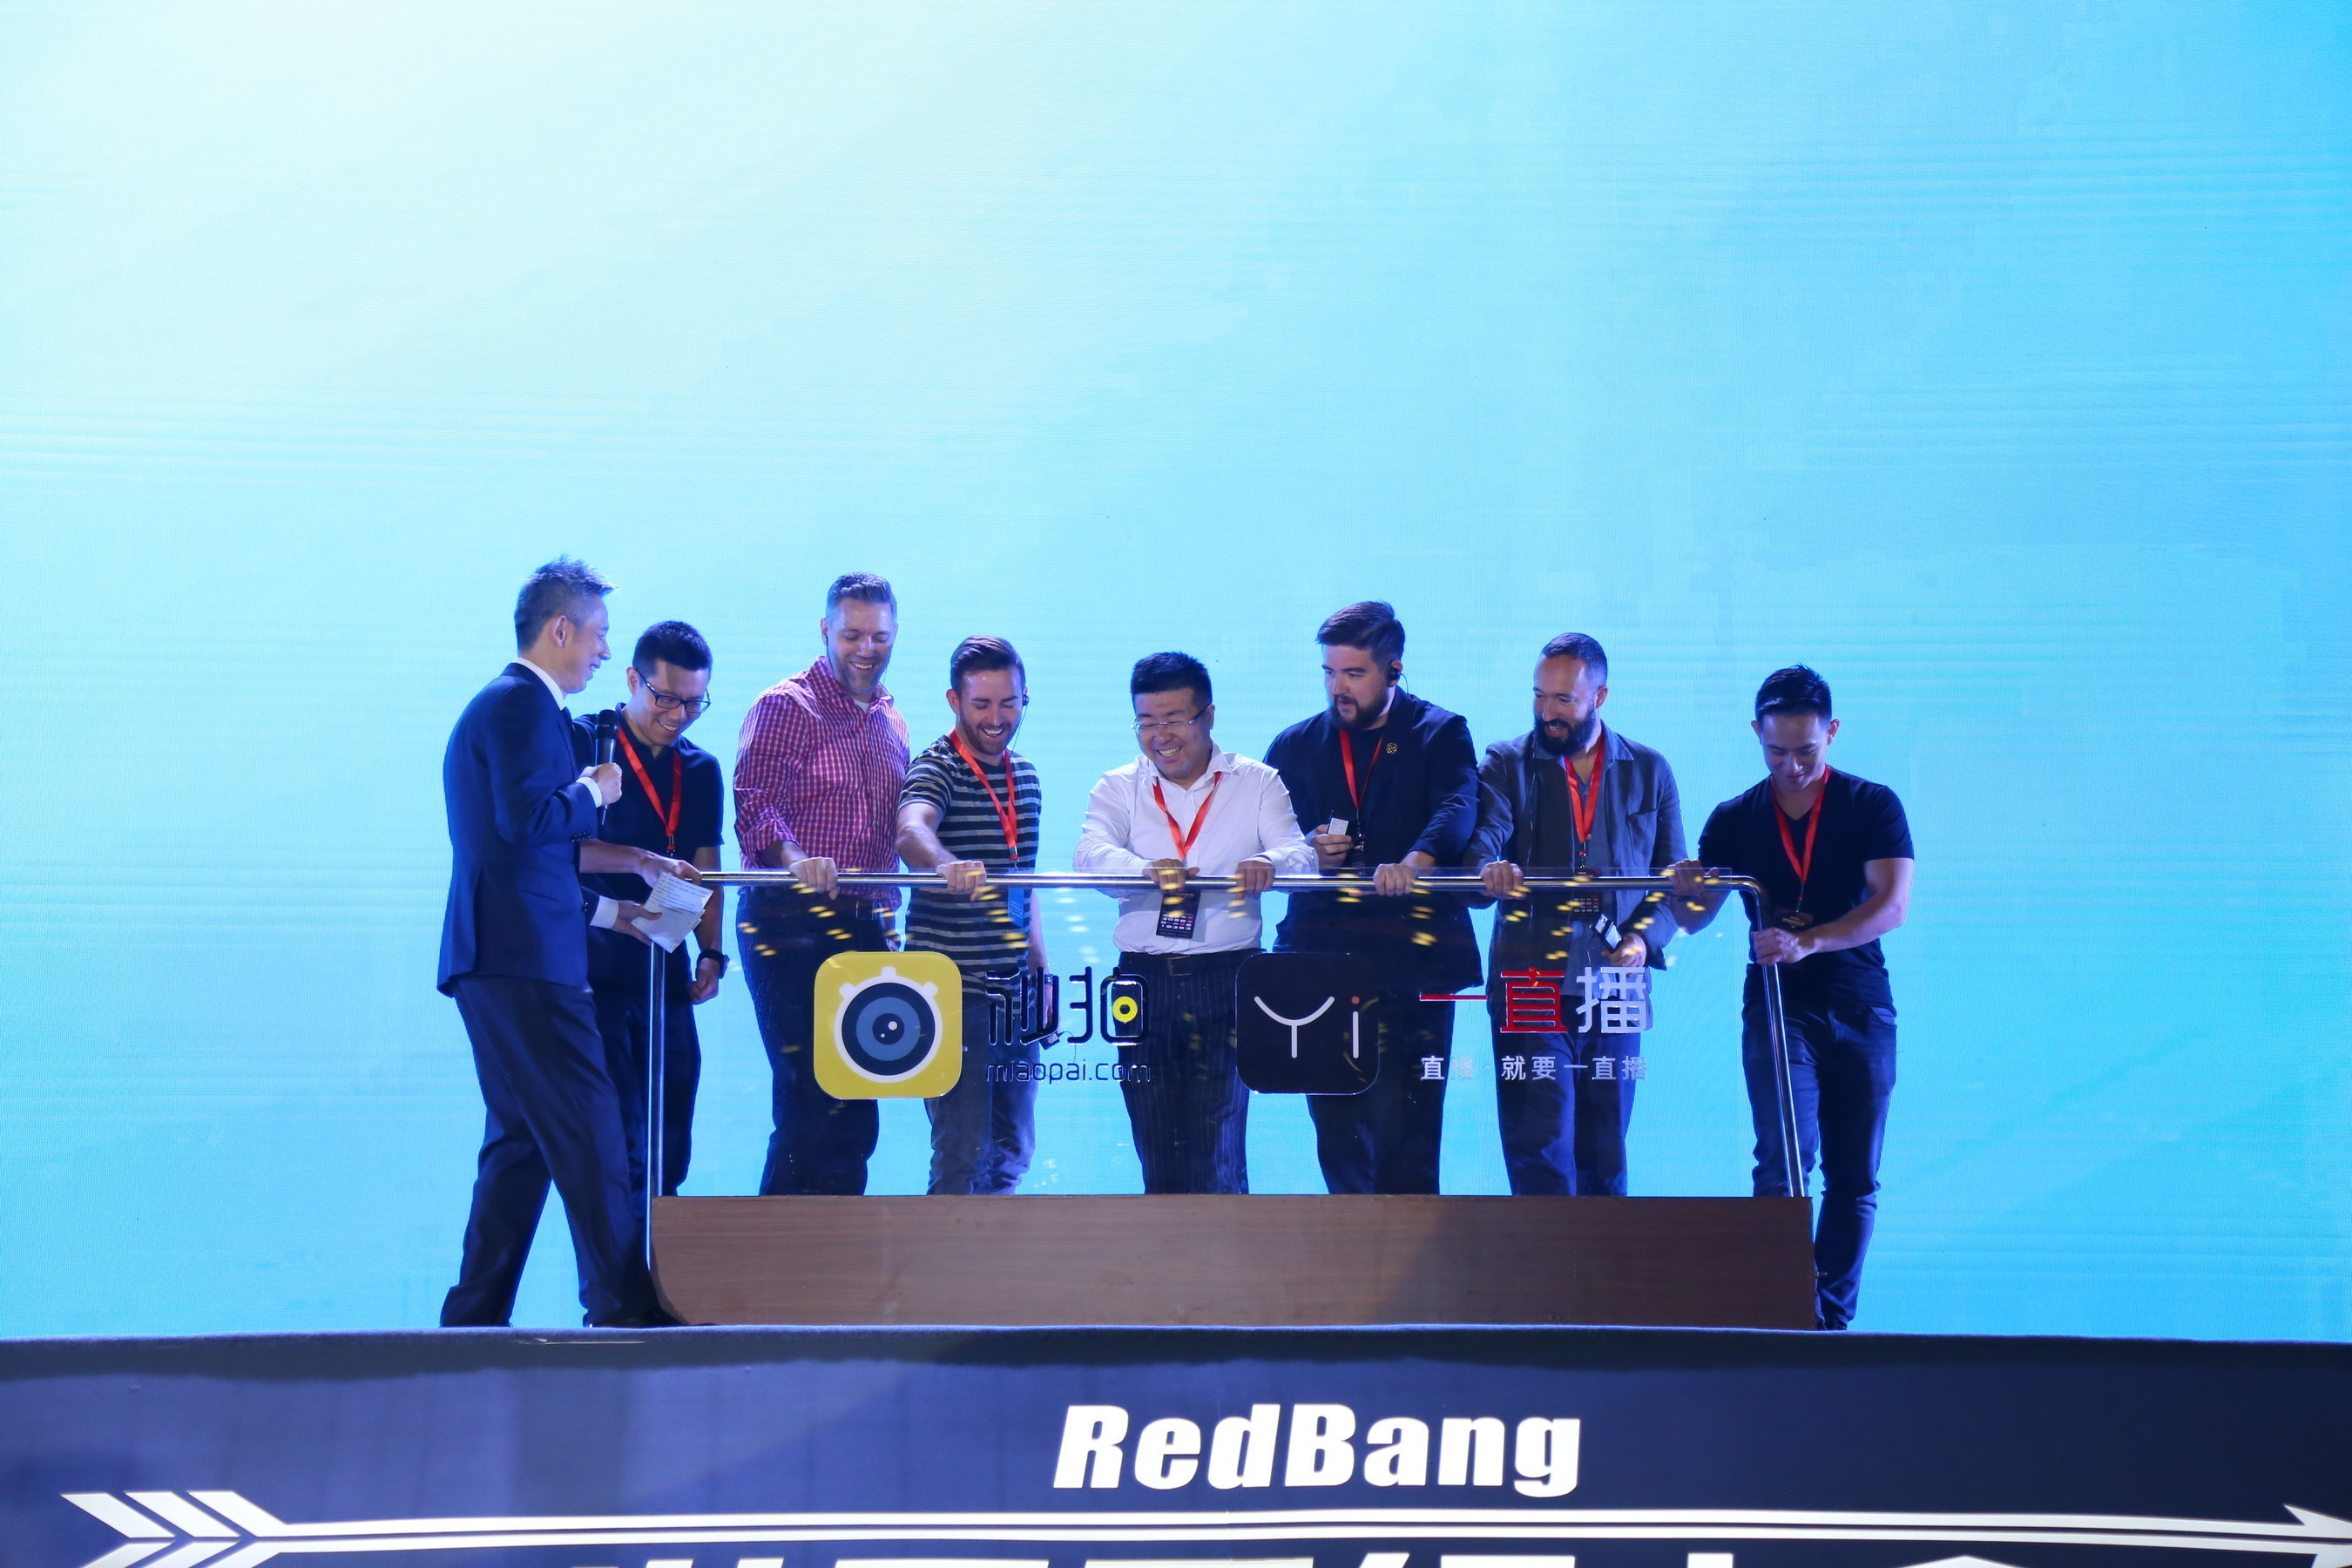 The First RedBang Summit in Beijing, China